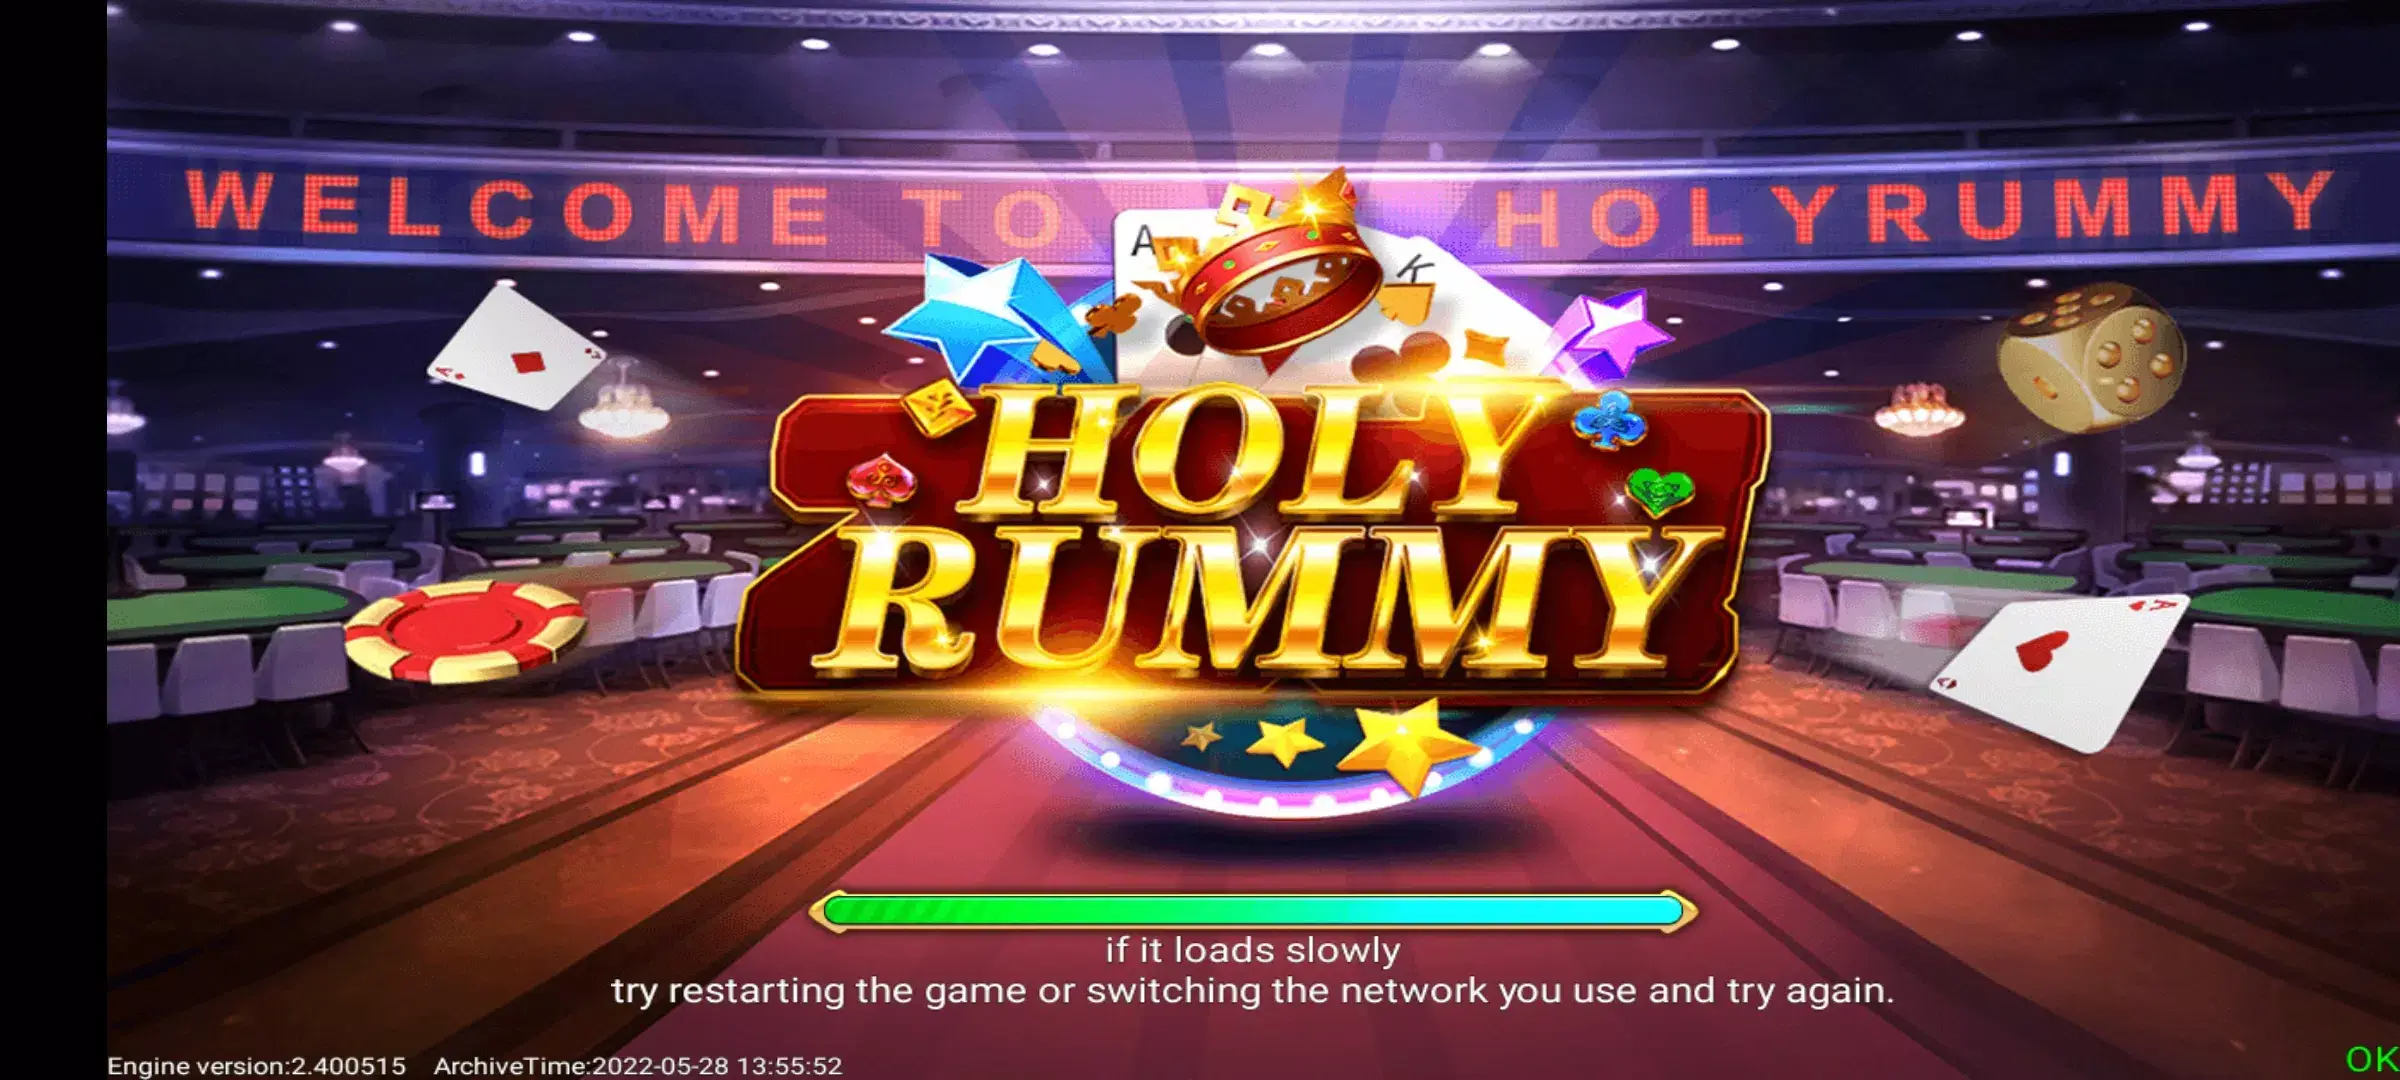 Holy rummy apk download